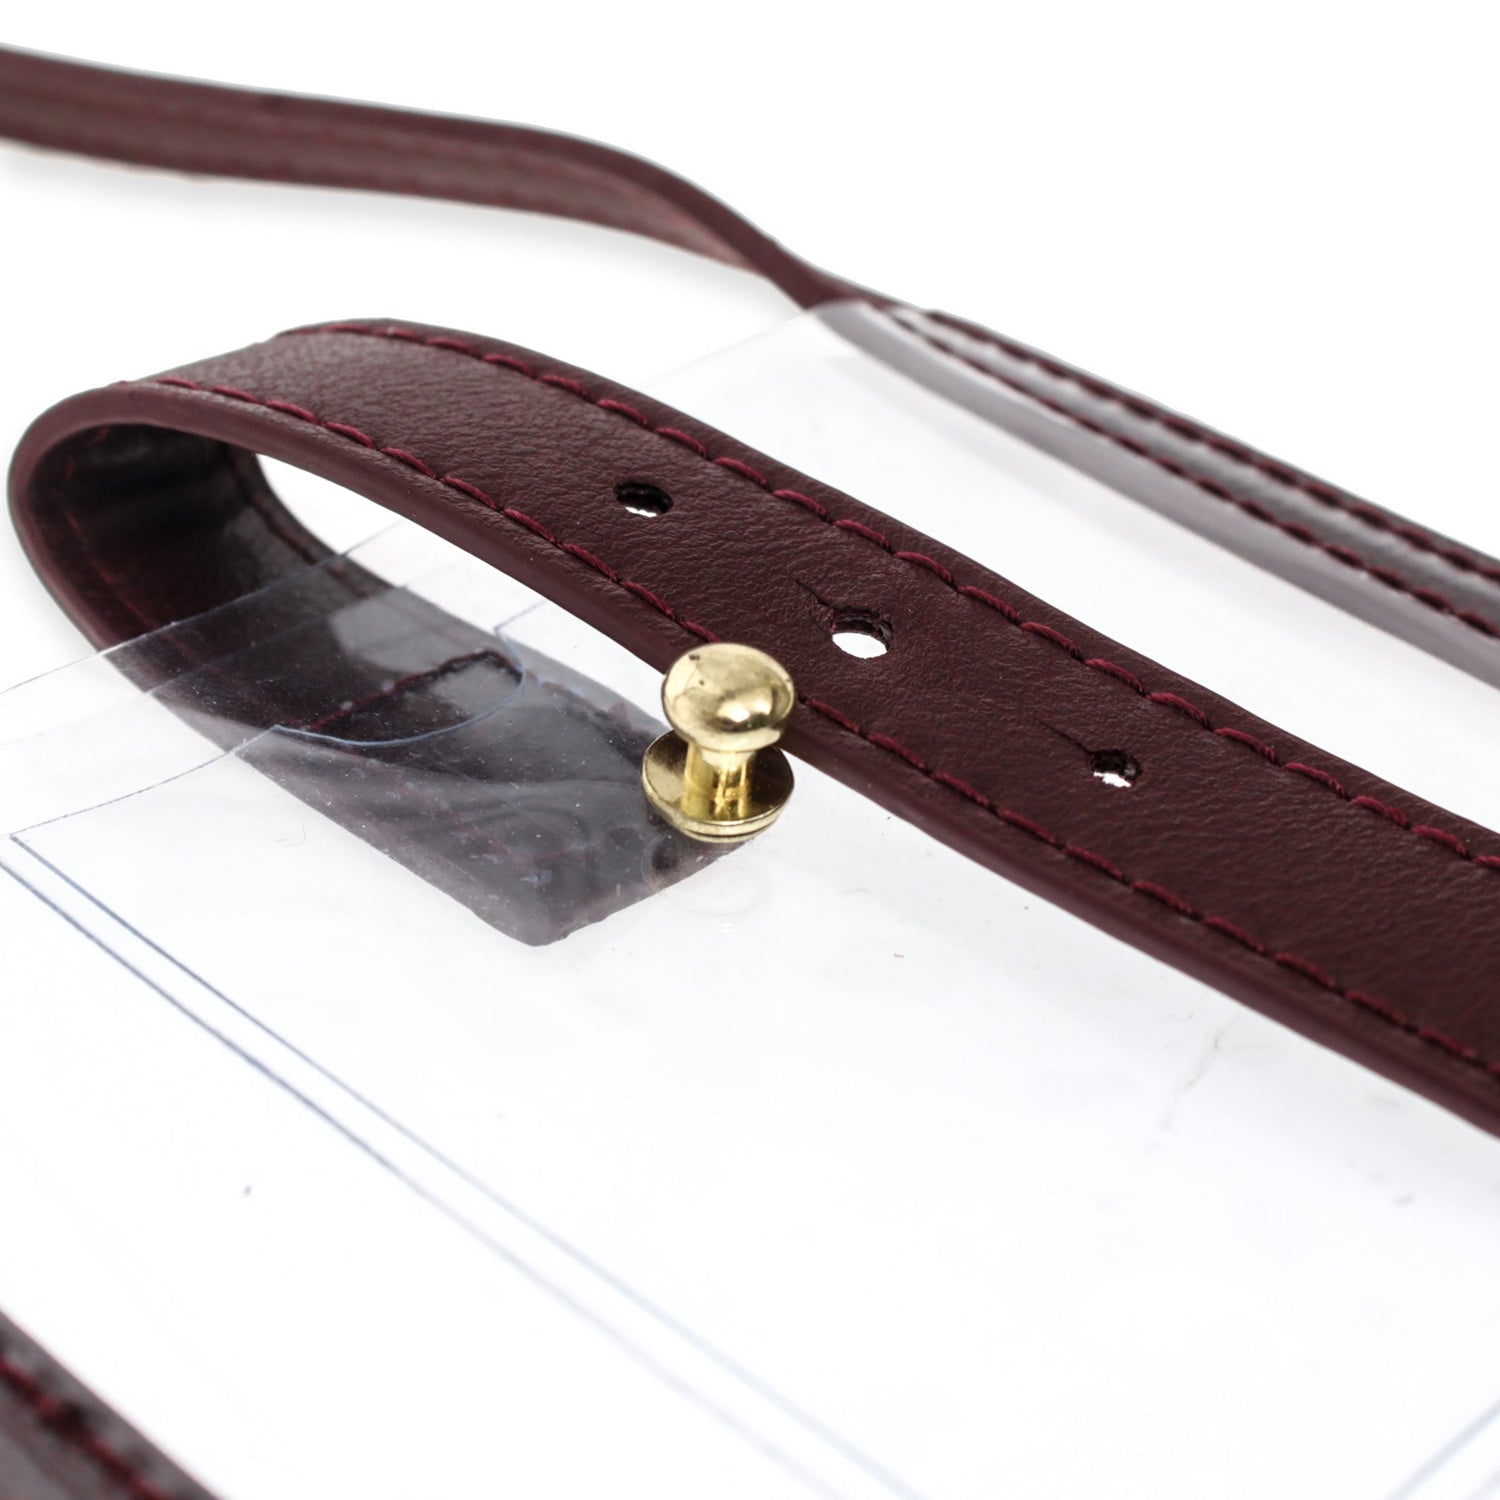 Maroon Leather Clear Phone Holder Cross Body